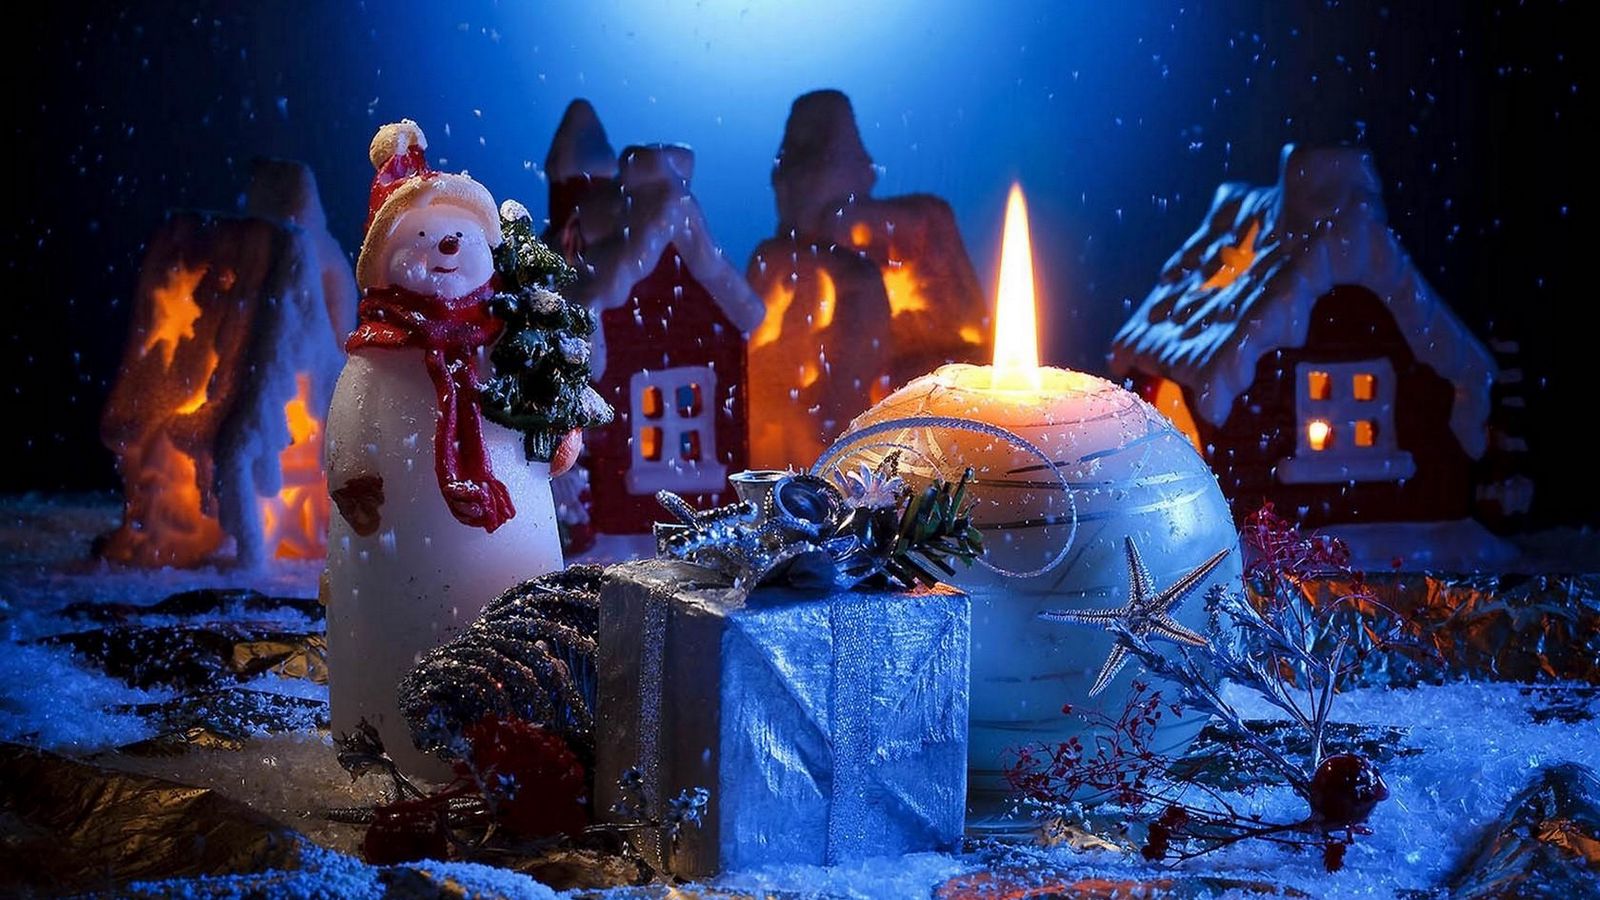 Download wallpaper 1600x900 candle, snowman, gift, home, holiday, new year, christmas widescreen 16:9 HD background